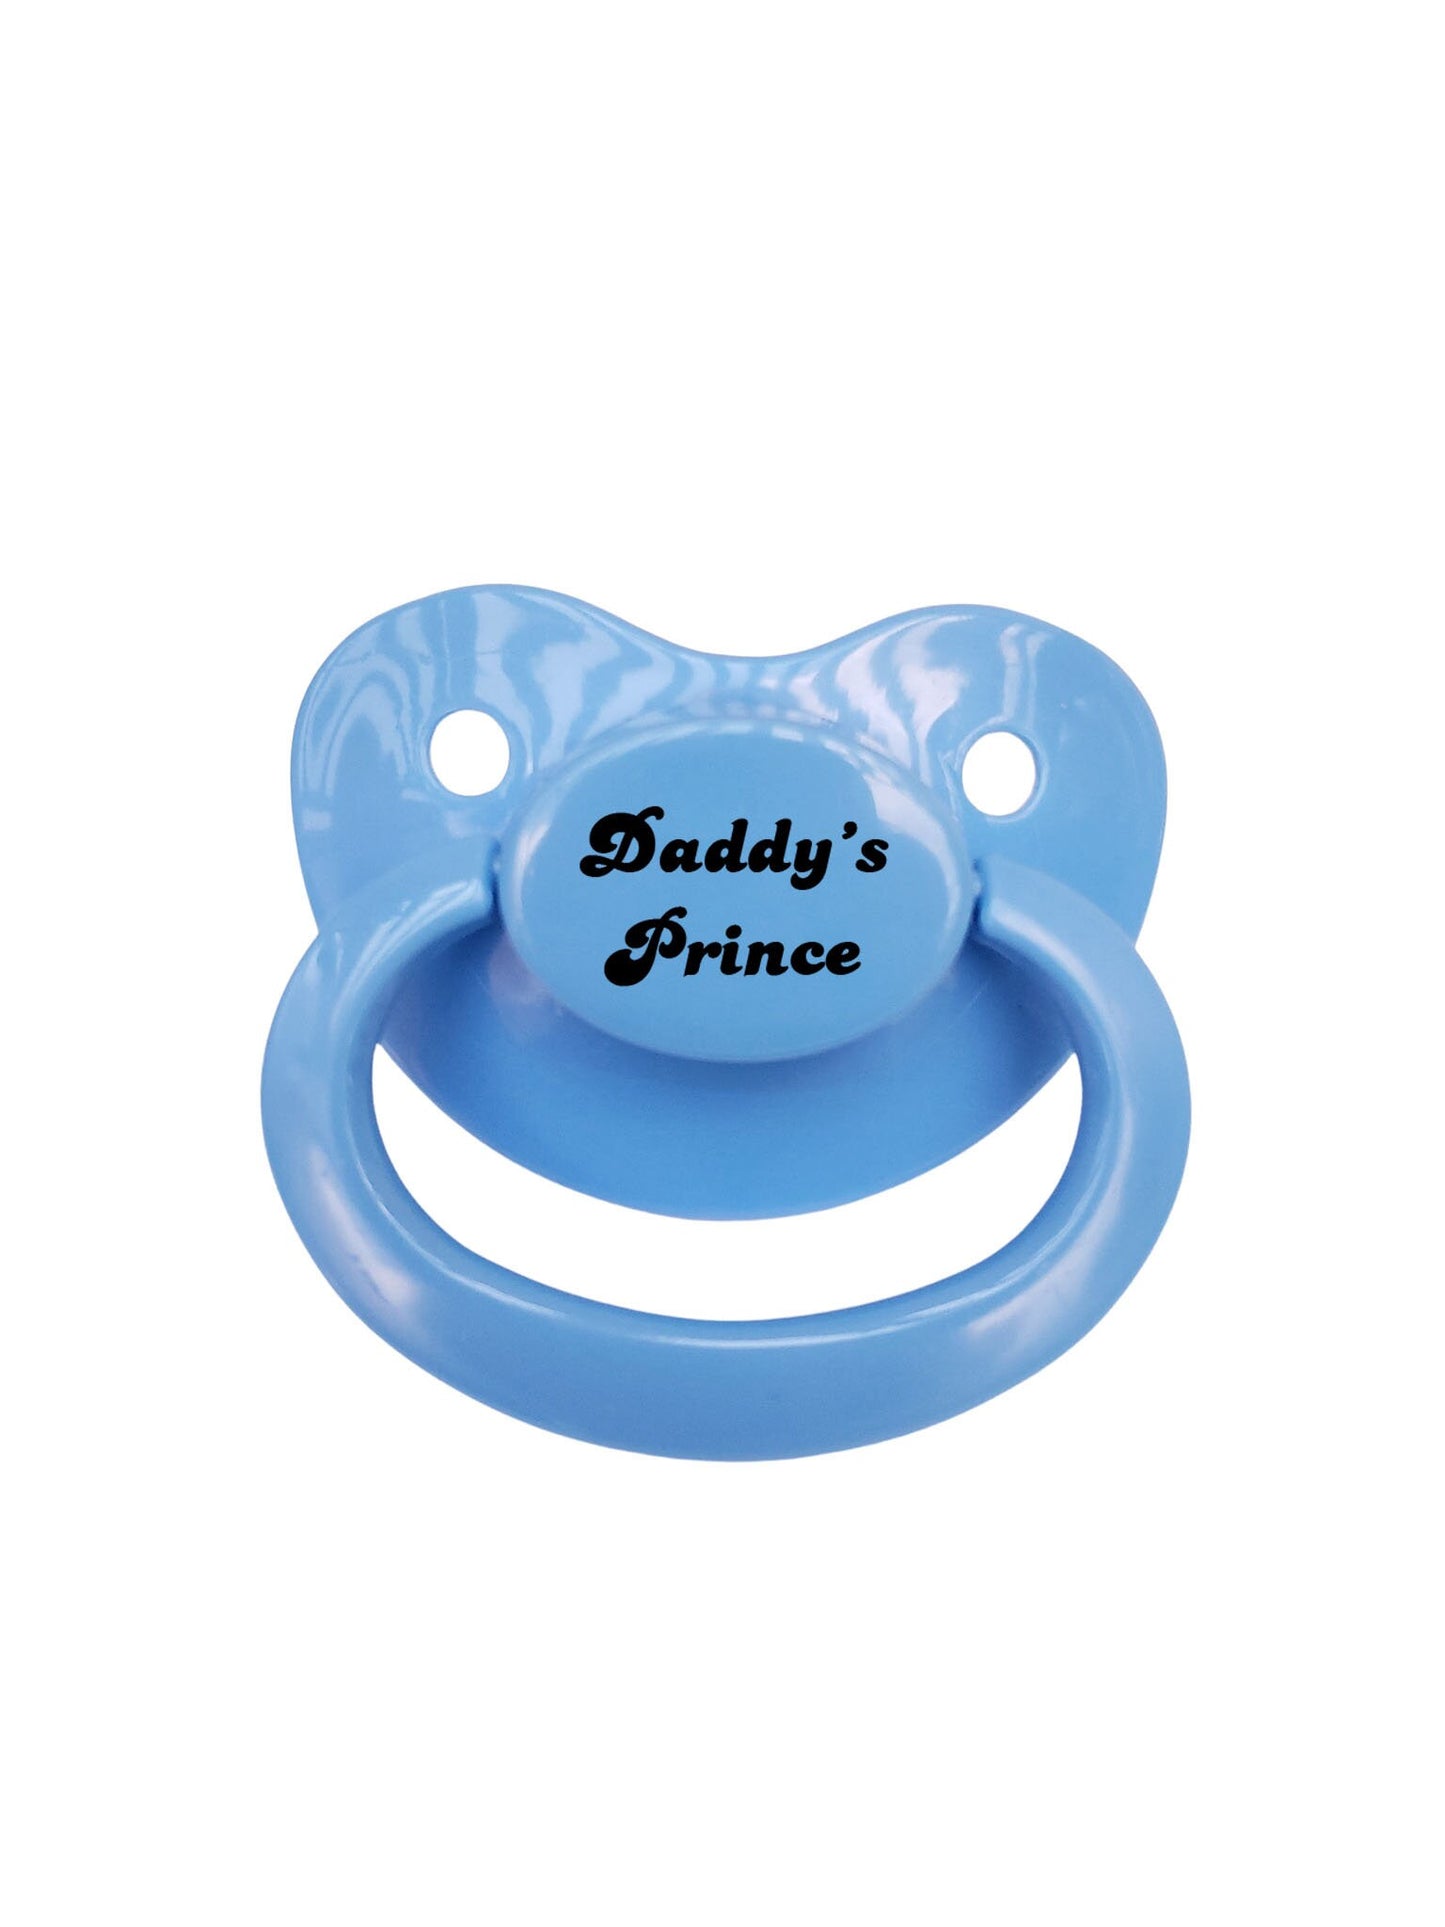 Daddy's Prince Adult Pacifier